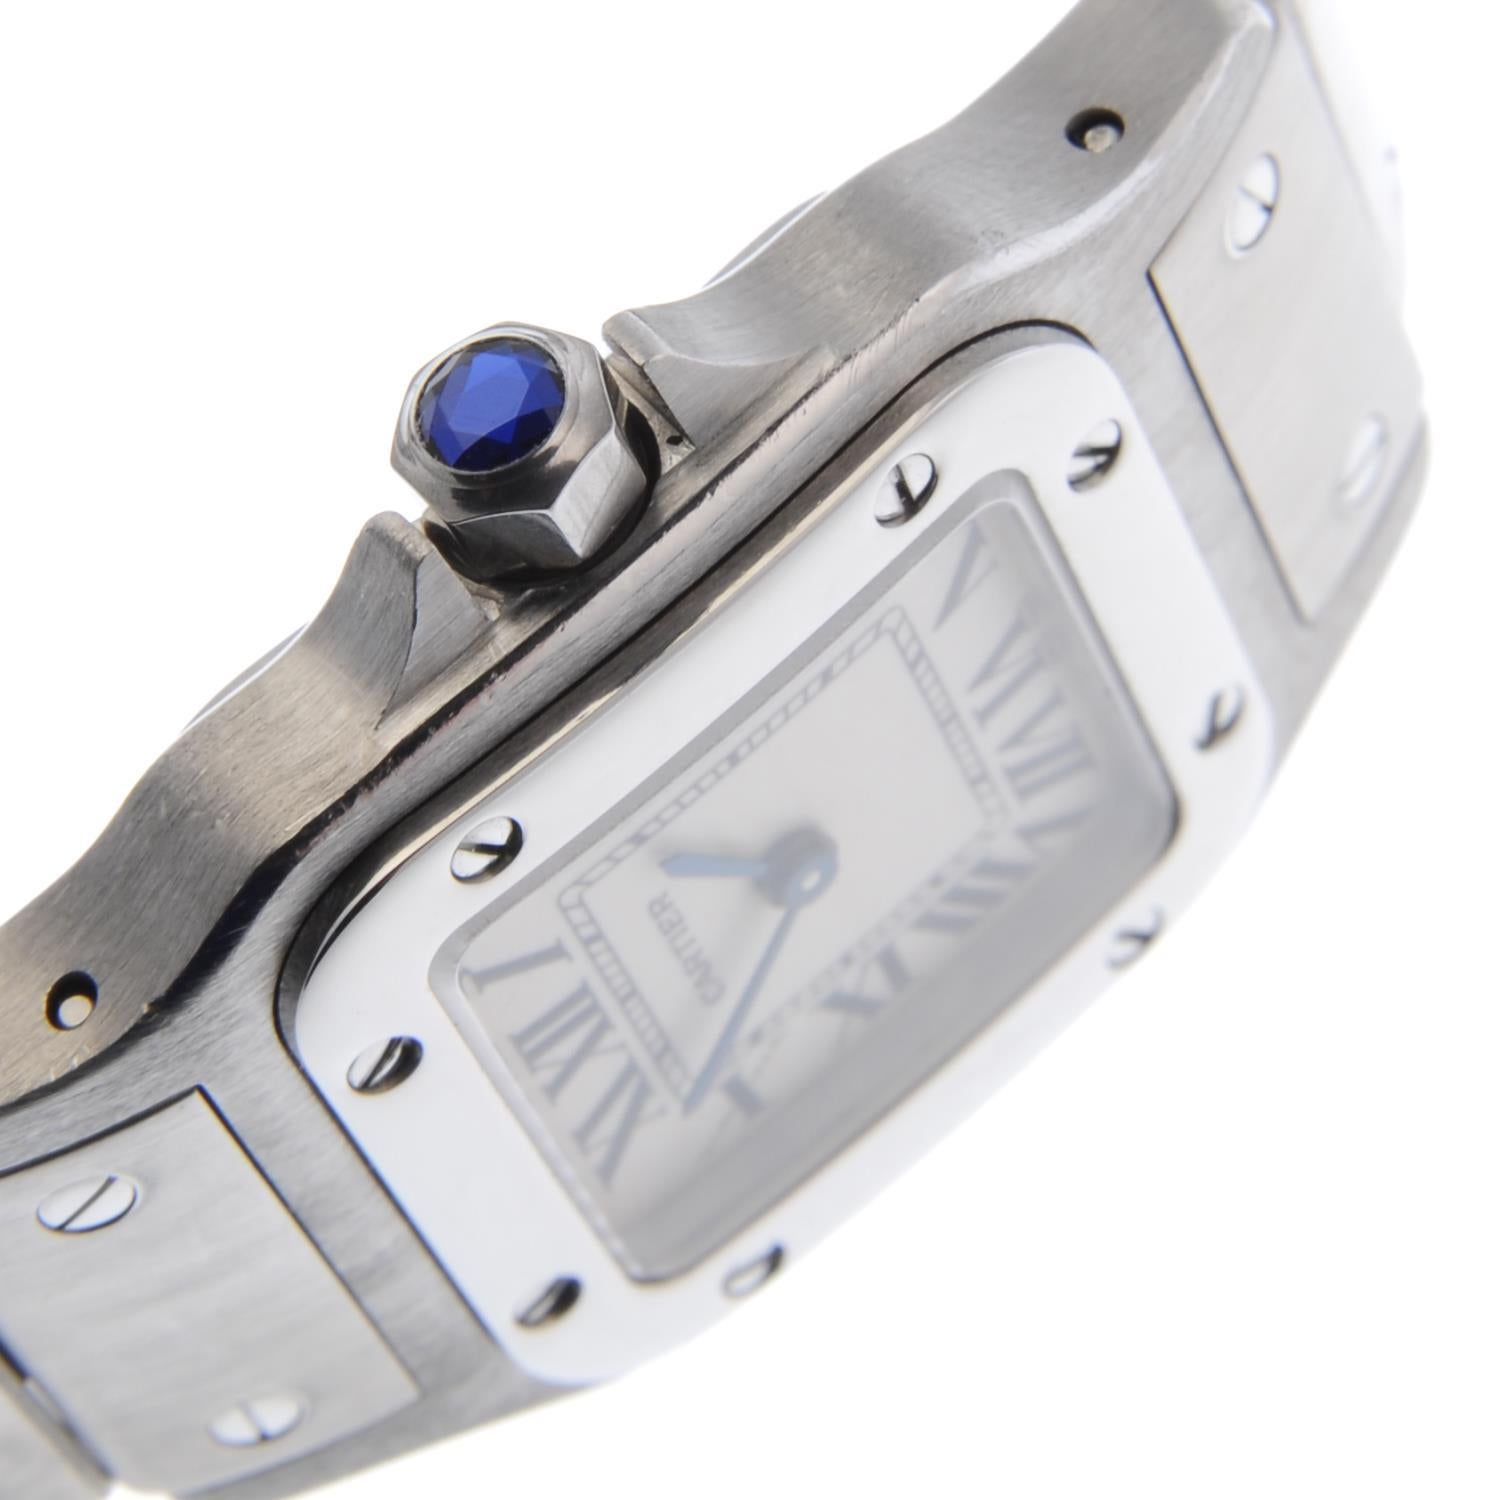 Contemporary Cartier Santos Bracelet Watch, Stainless Steel Case, Reference 1565